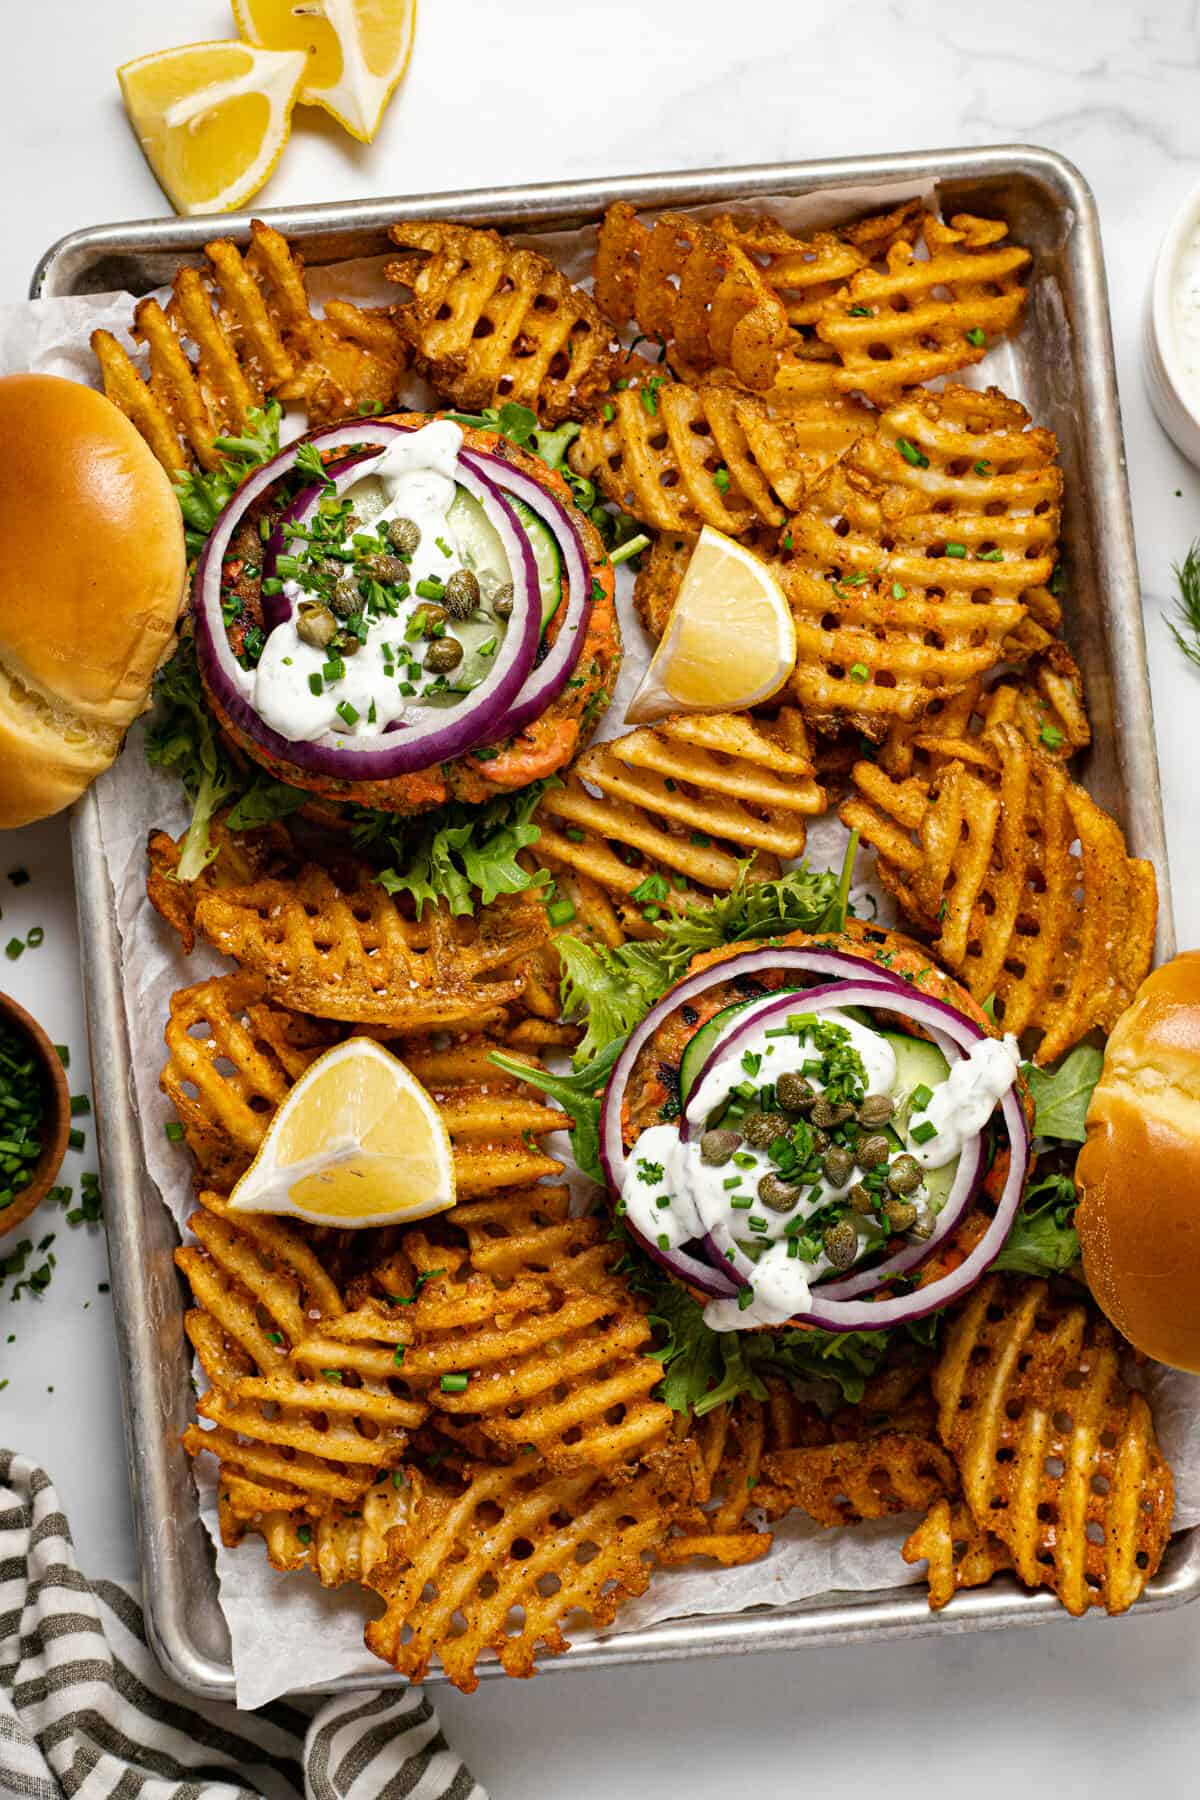 Metal baking sheet with 2 salmon burgers and waffles fries on it